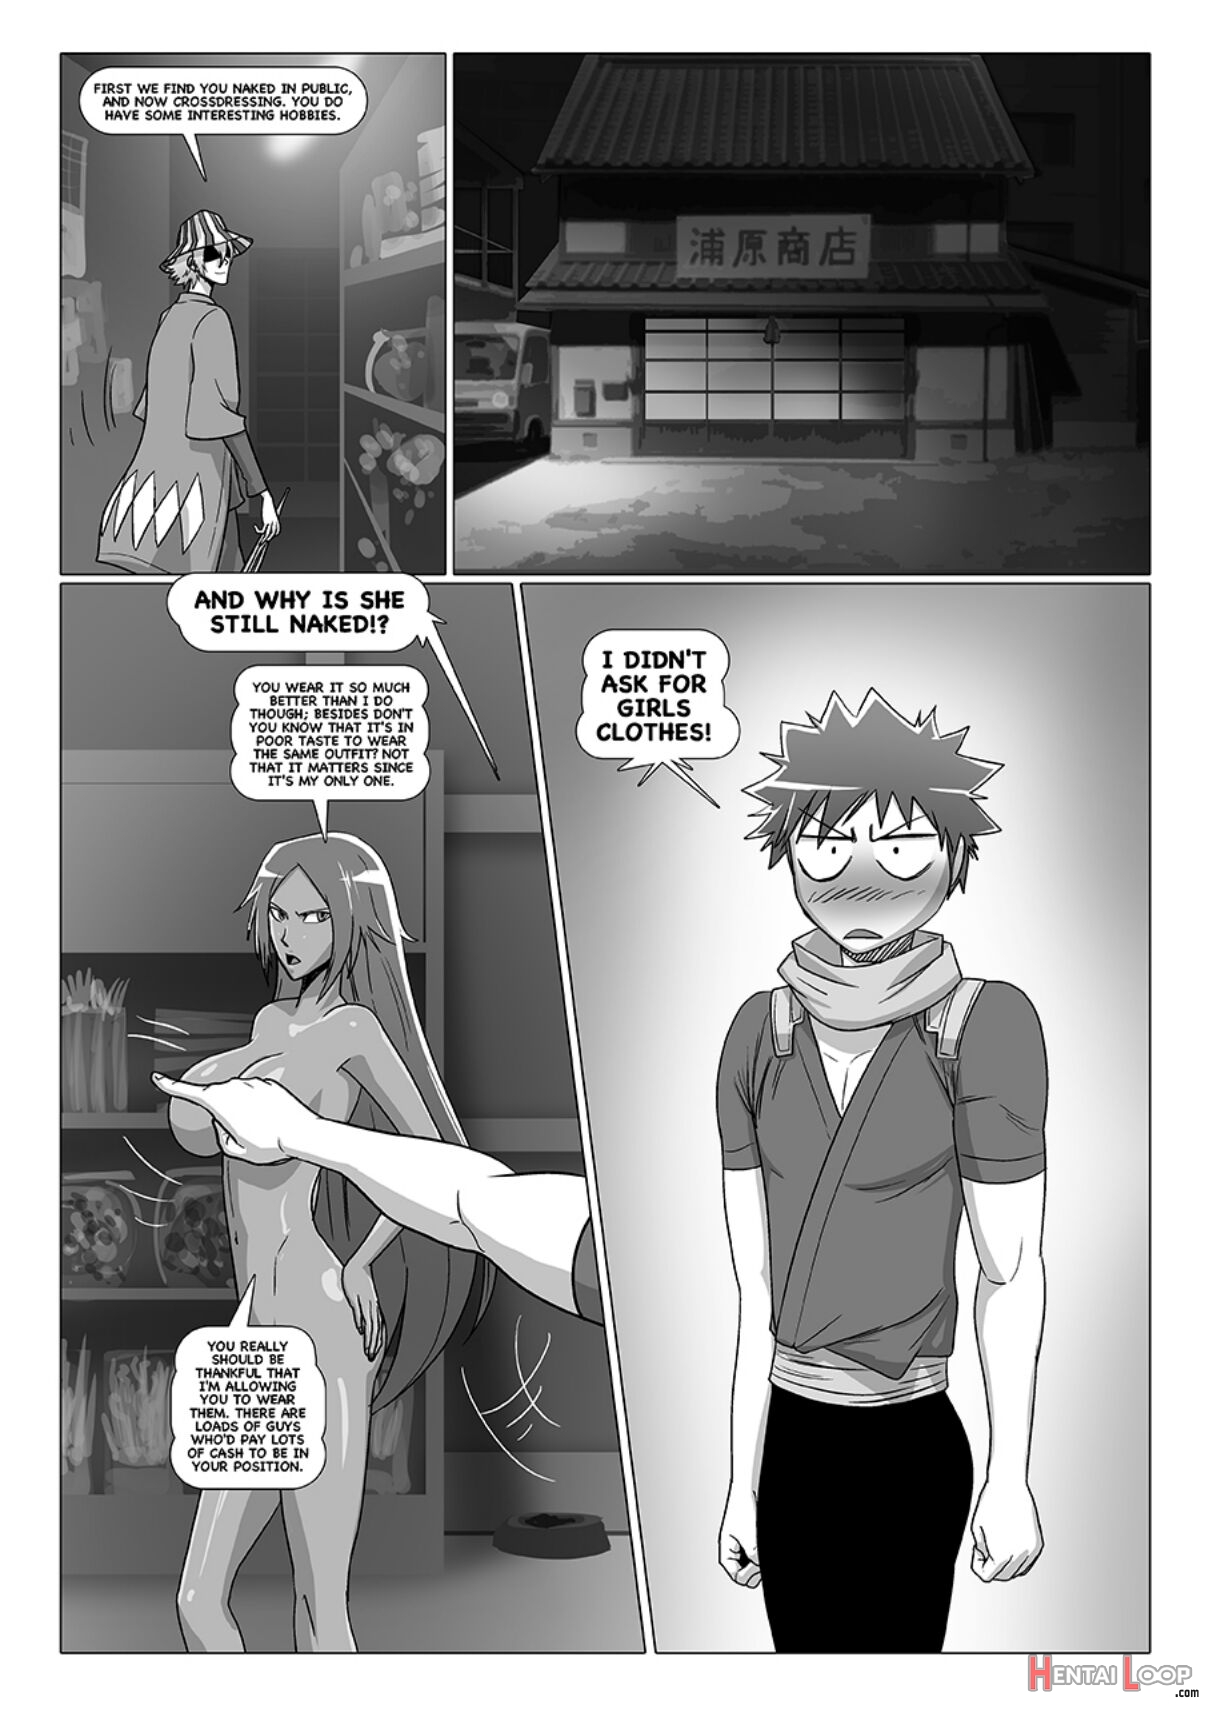 Happy To Serve You - Xxx Version page 465